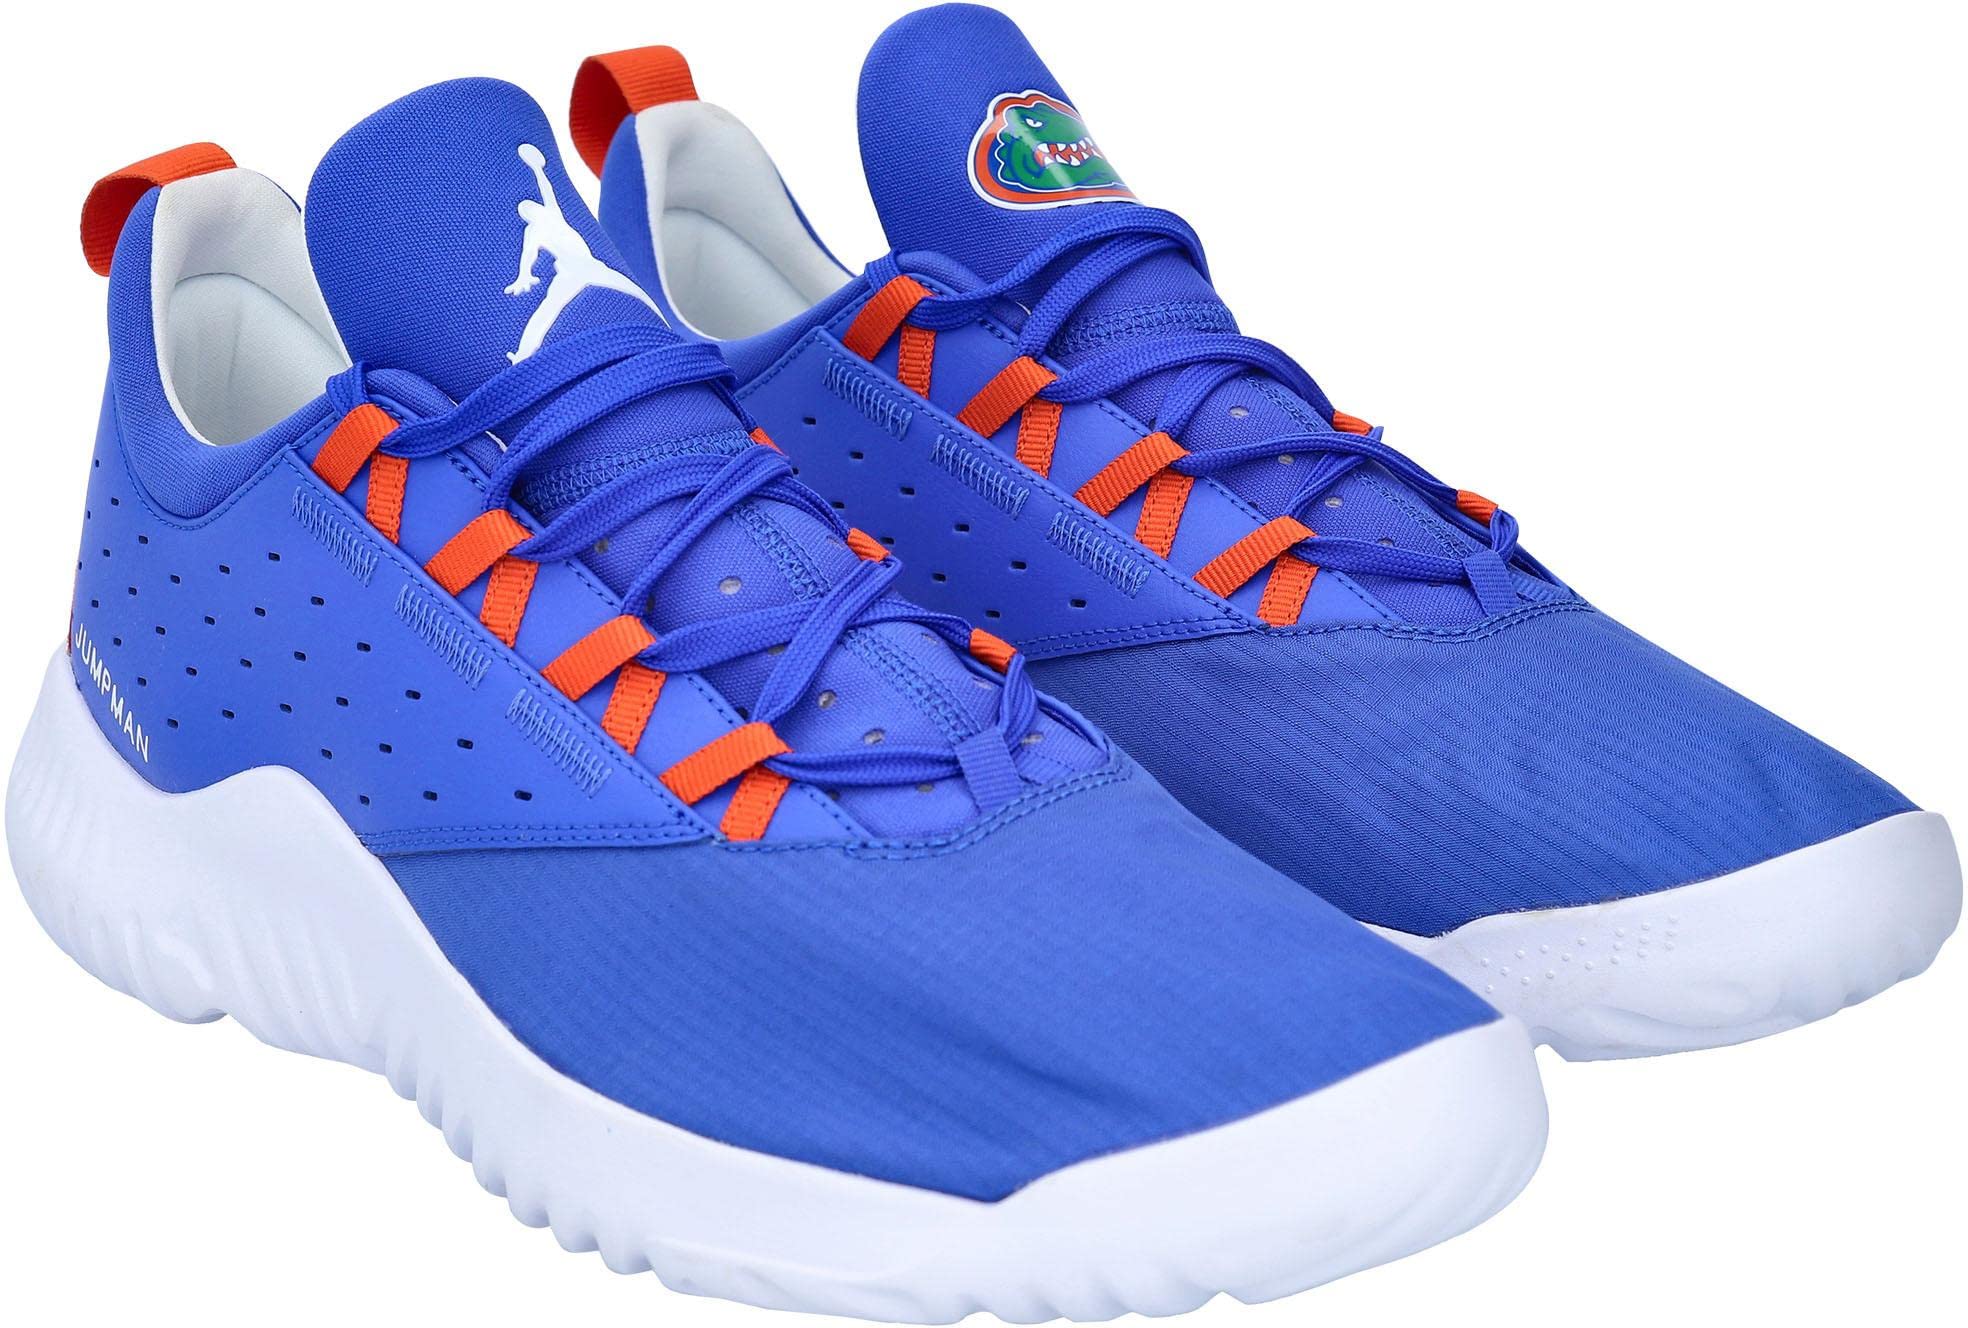 Florida Gators Team-Issued Blue Jordan Proto-Lyte Turf Shoes from the 2020 NCAA Season - Size 15 - Other College Game Used Items